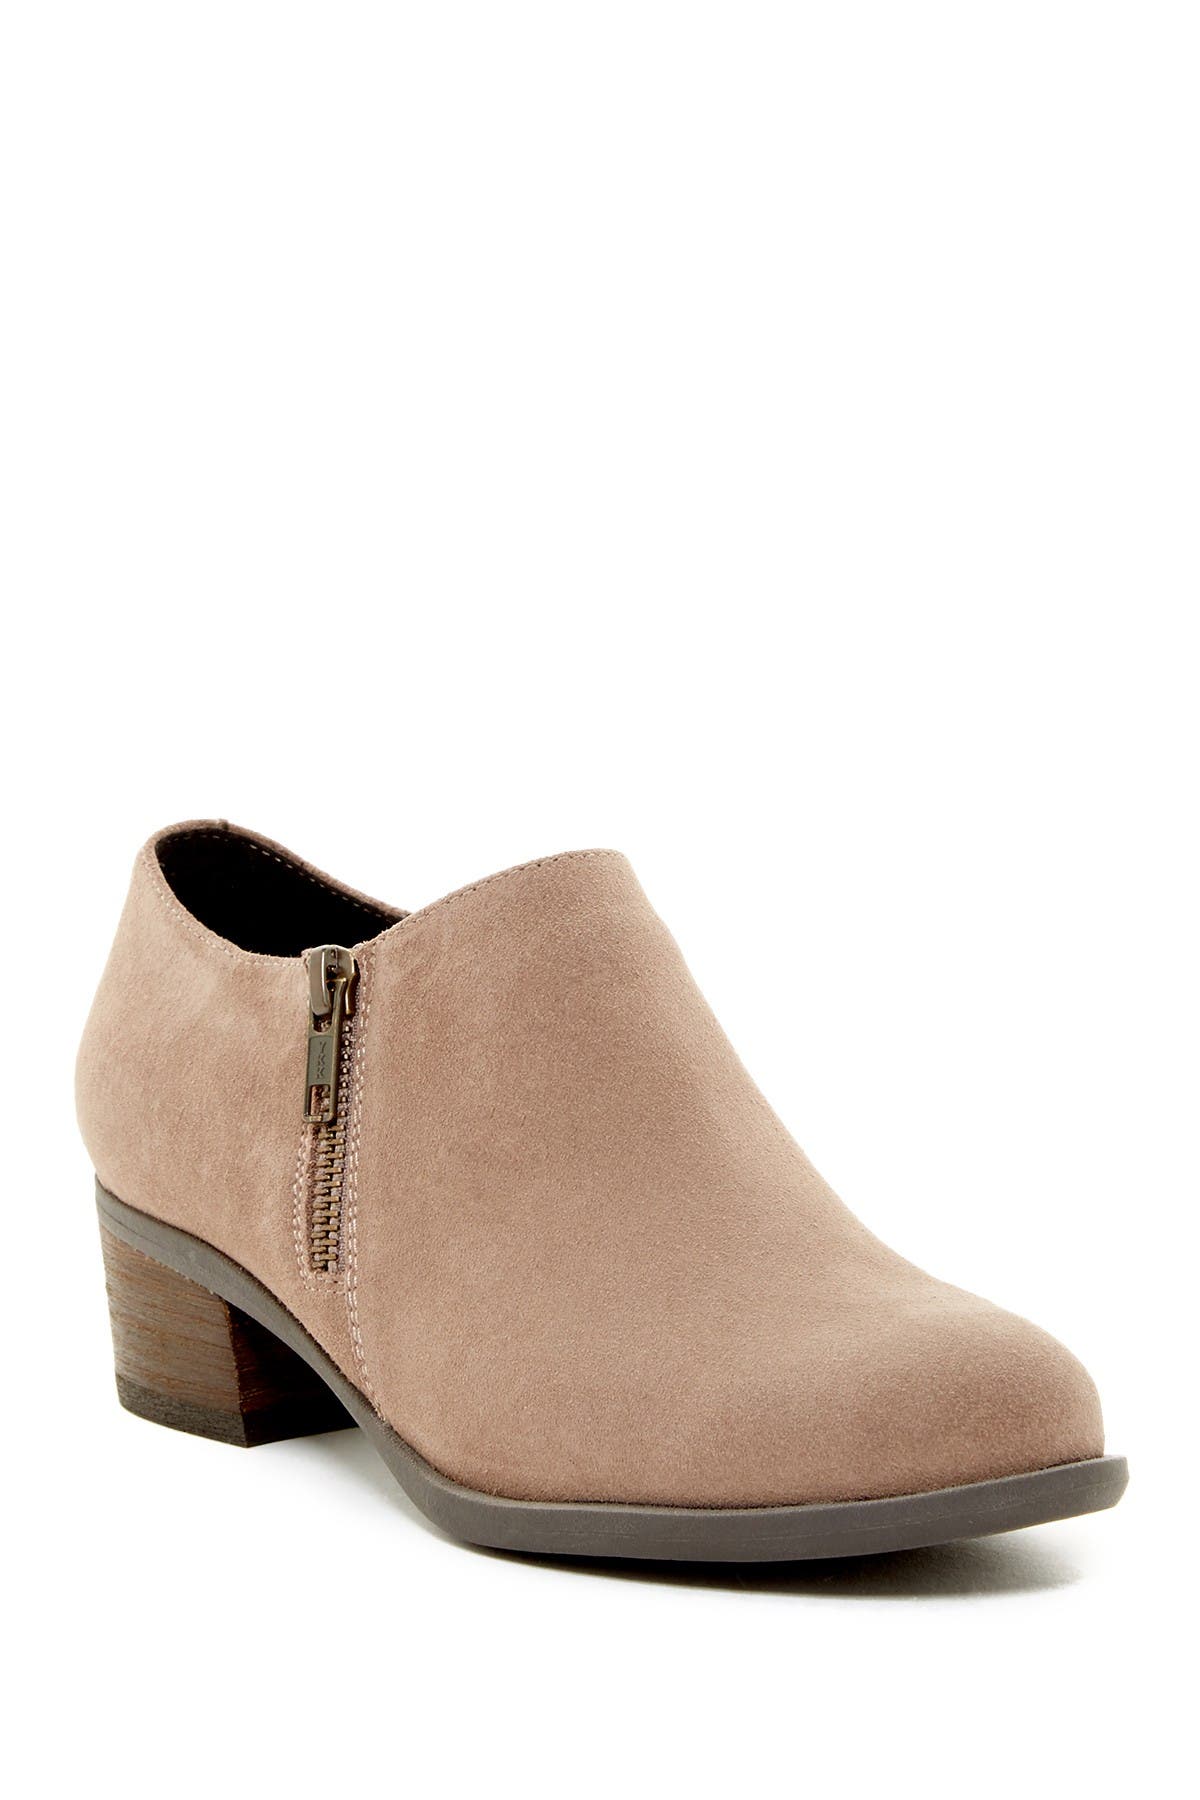 blondo ankle bootie